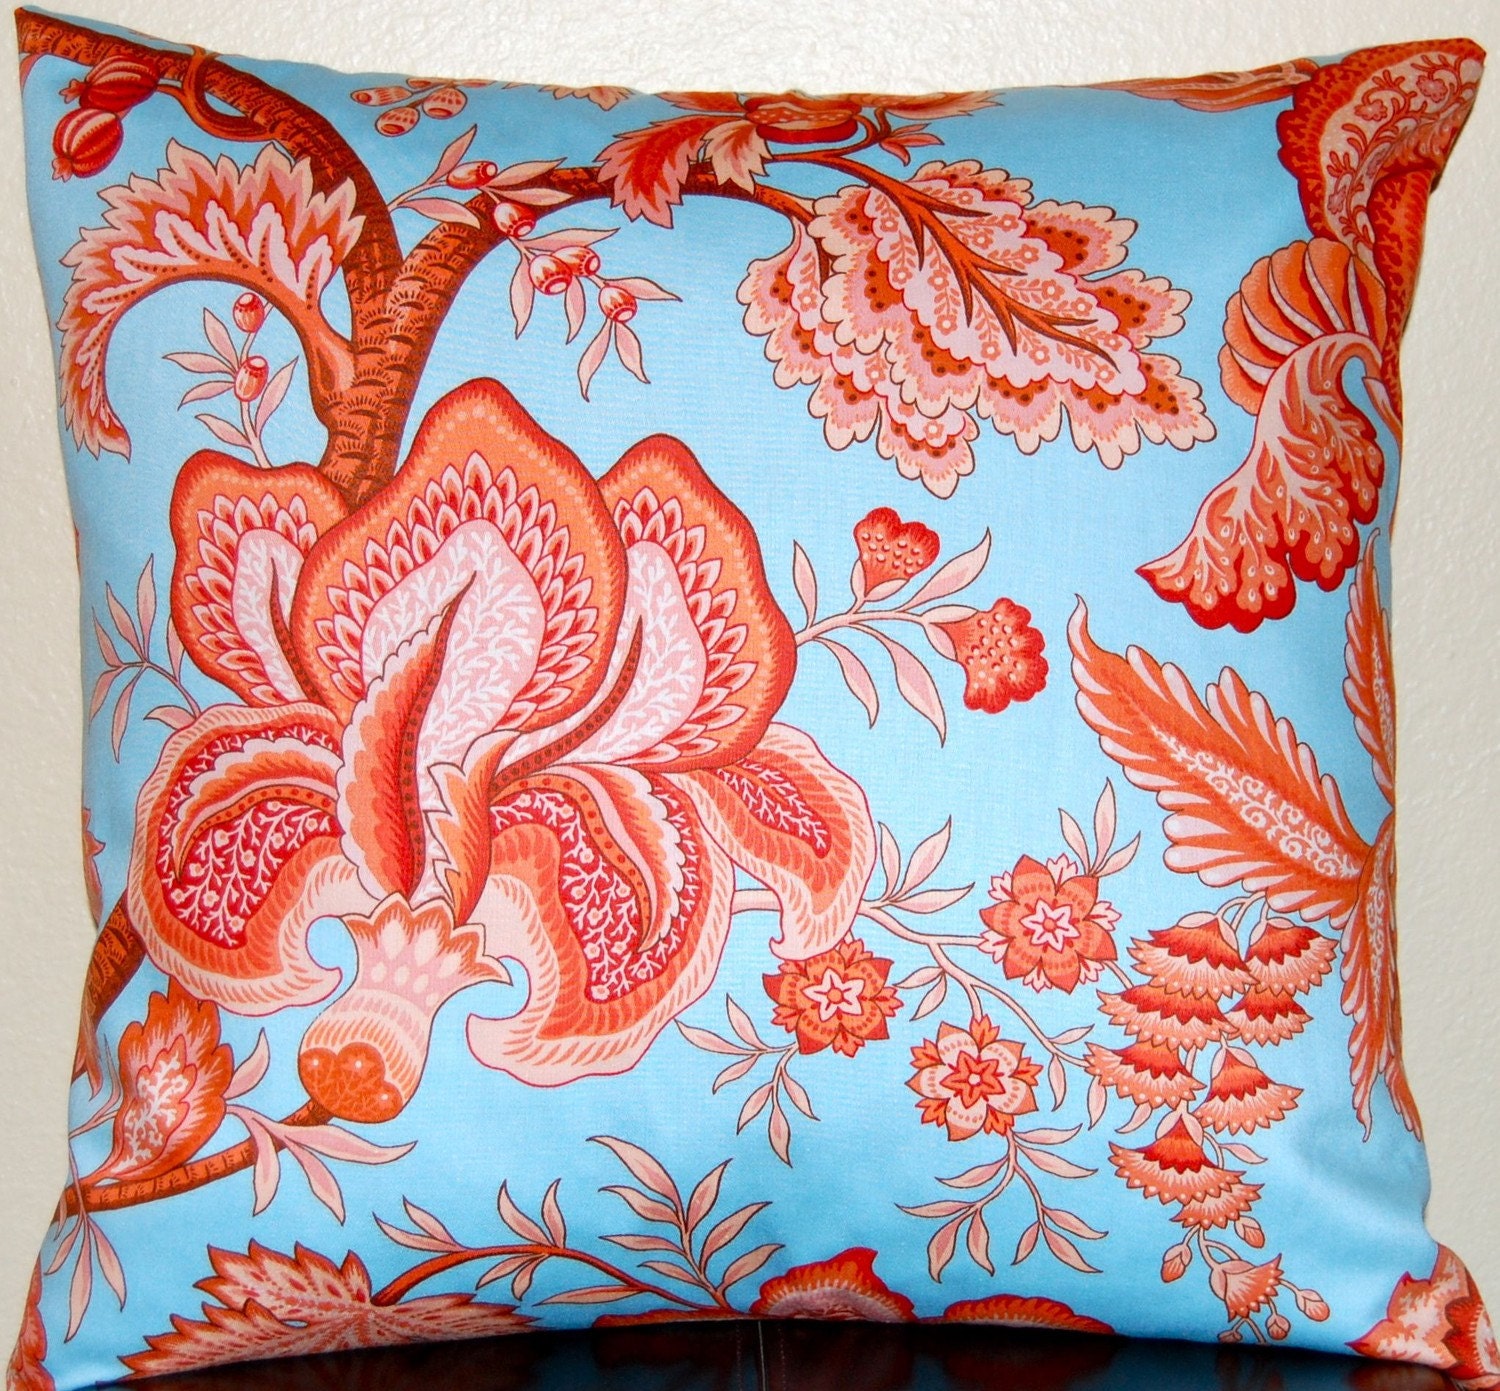 Floral Pillows Blue and Coral Throw Pillow Covers  20 x 20 Inches